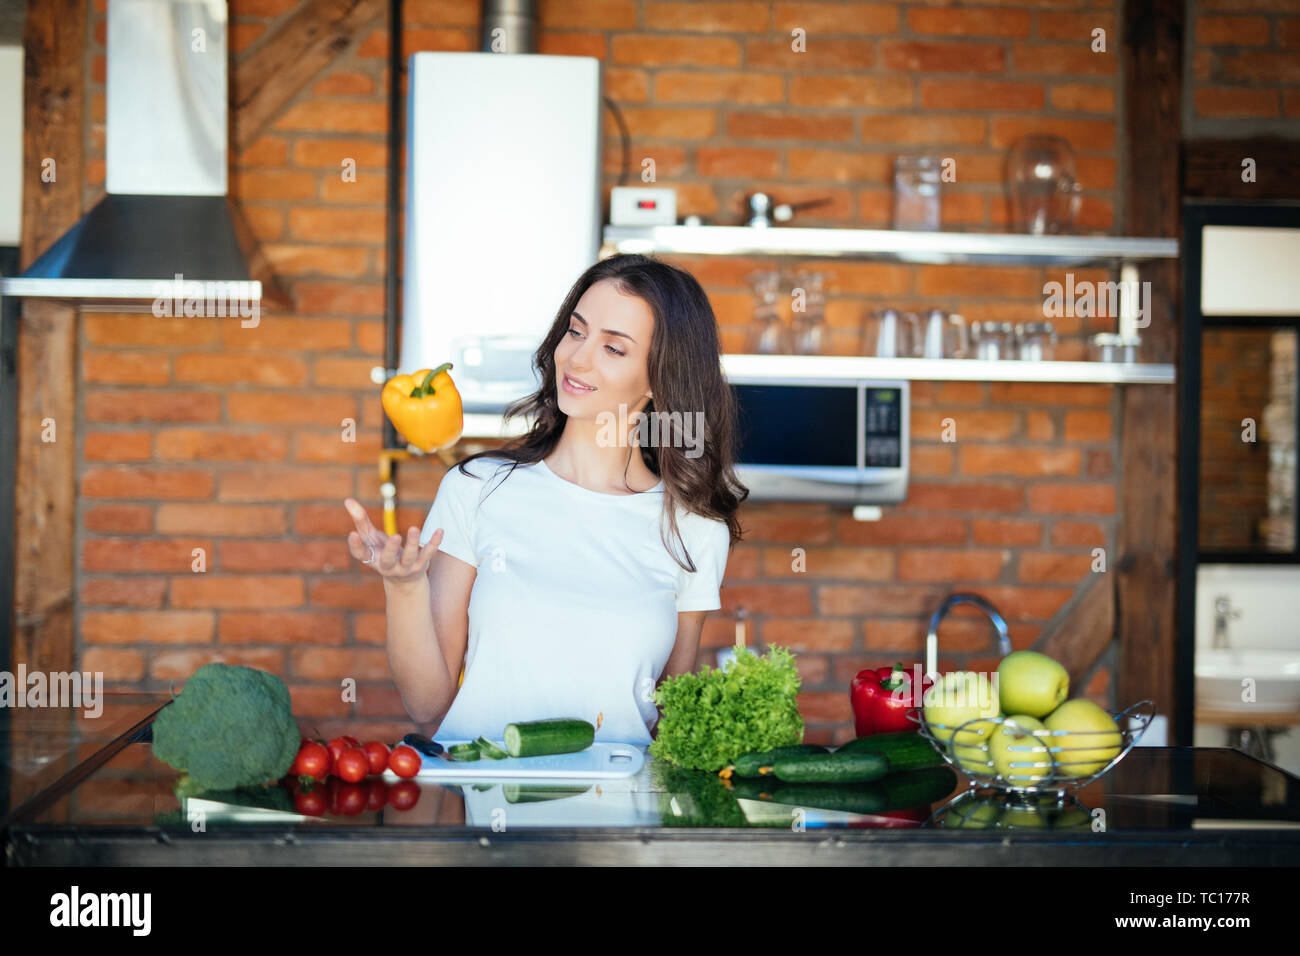 During active conversation. Chatty lady playing with vegetables while talking on mobile phone on her modern kitchen Stock Photo